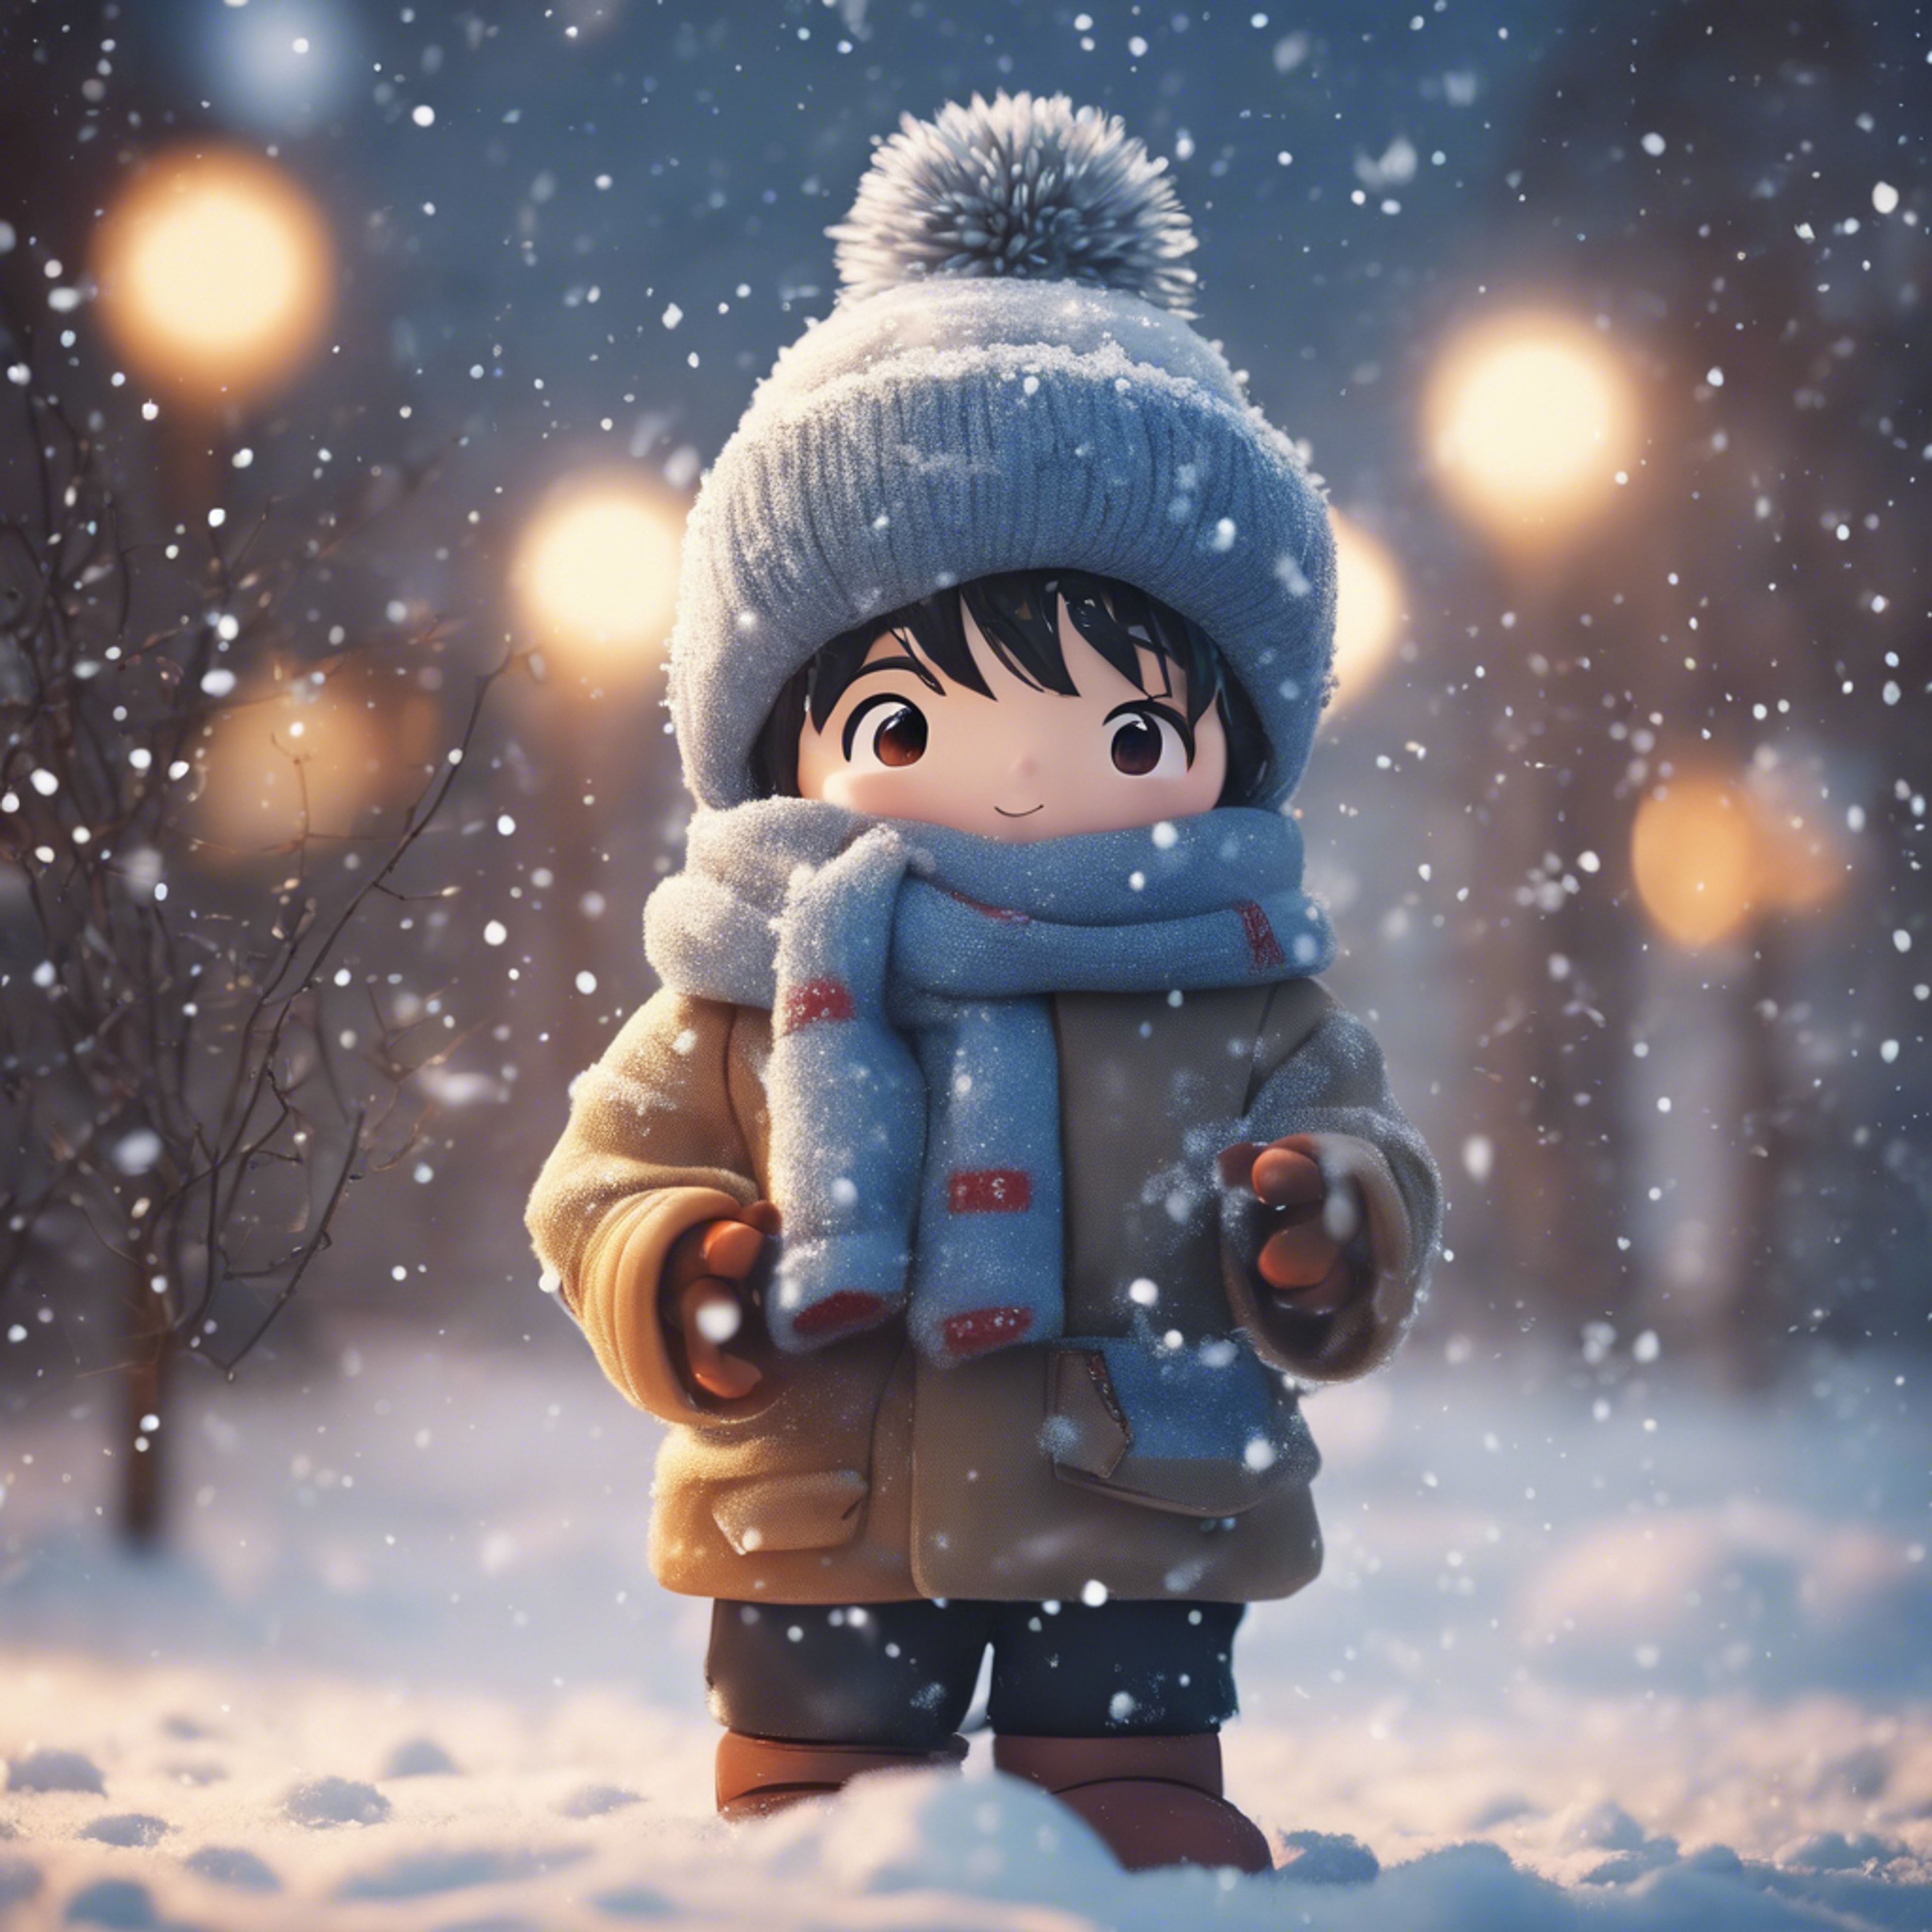 Anime boy wrapped in warm winter clothes, building a playful snowman in the snowfall. Tapetai[d4075dc9b13644f685e7]